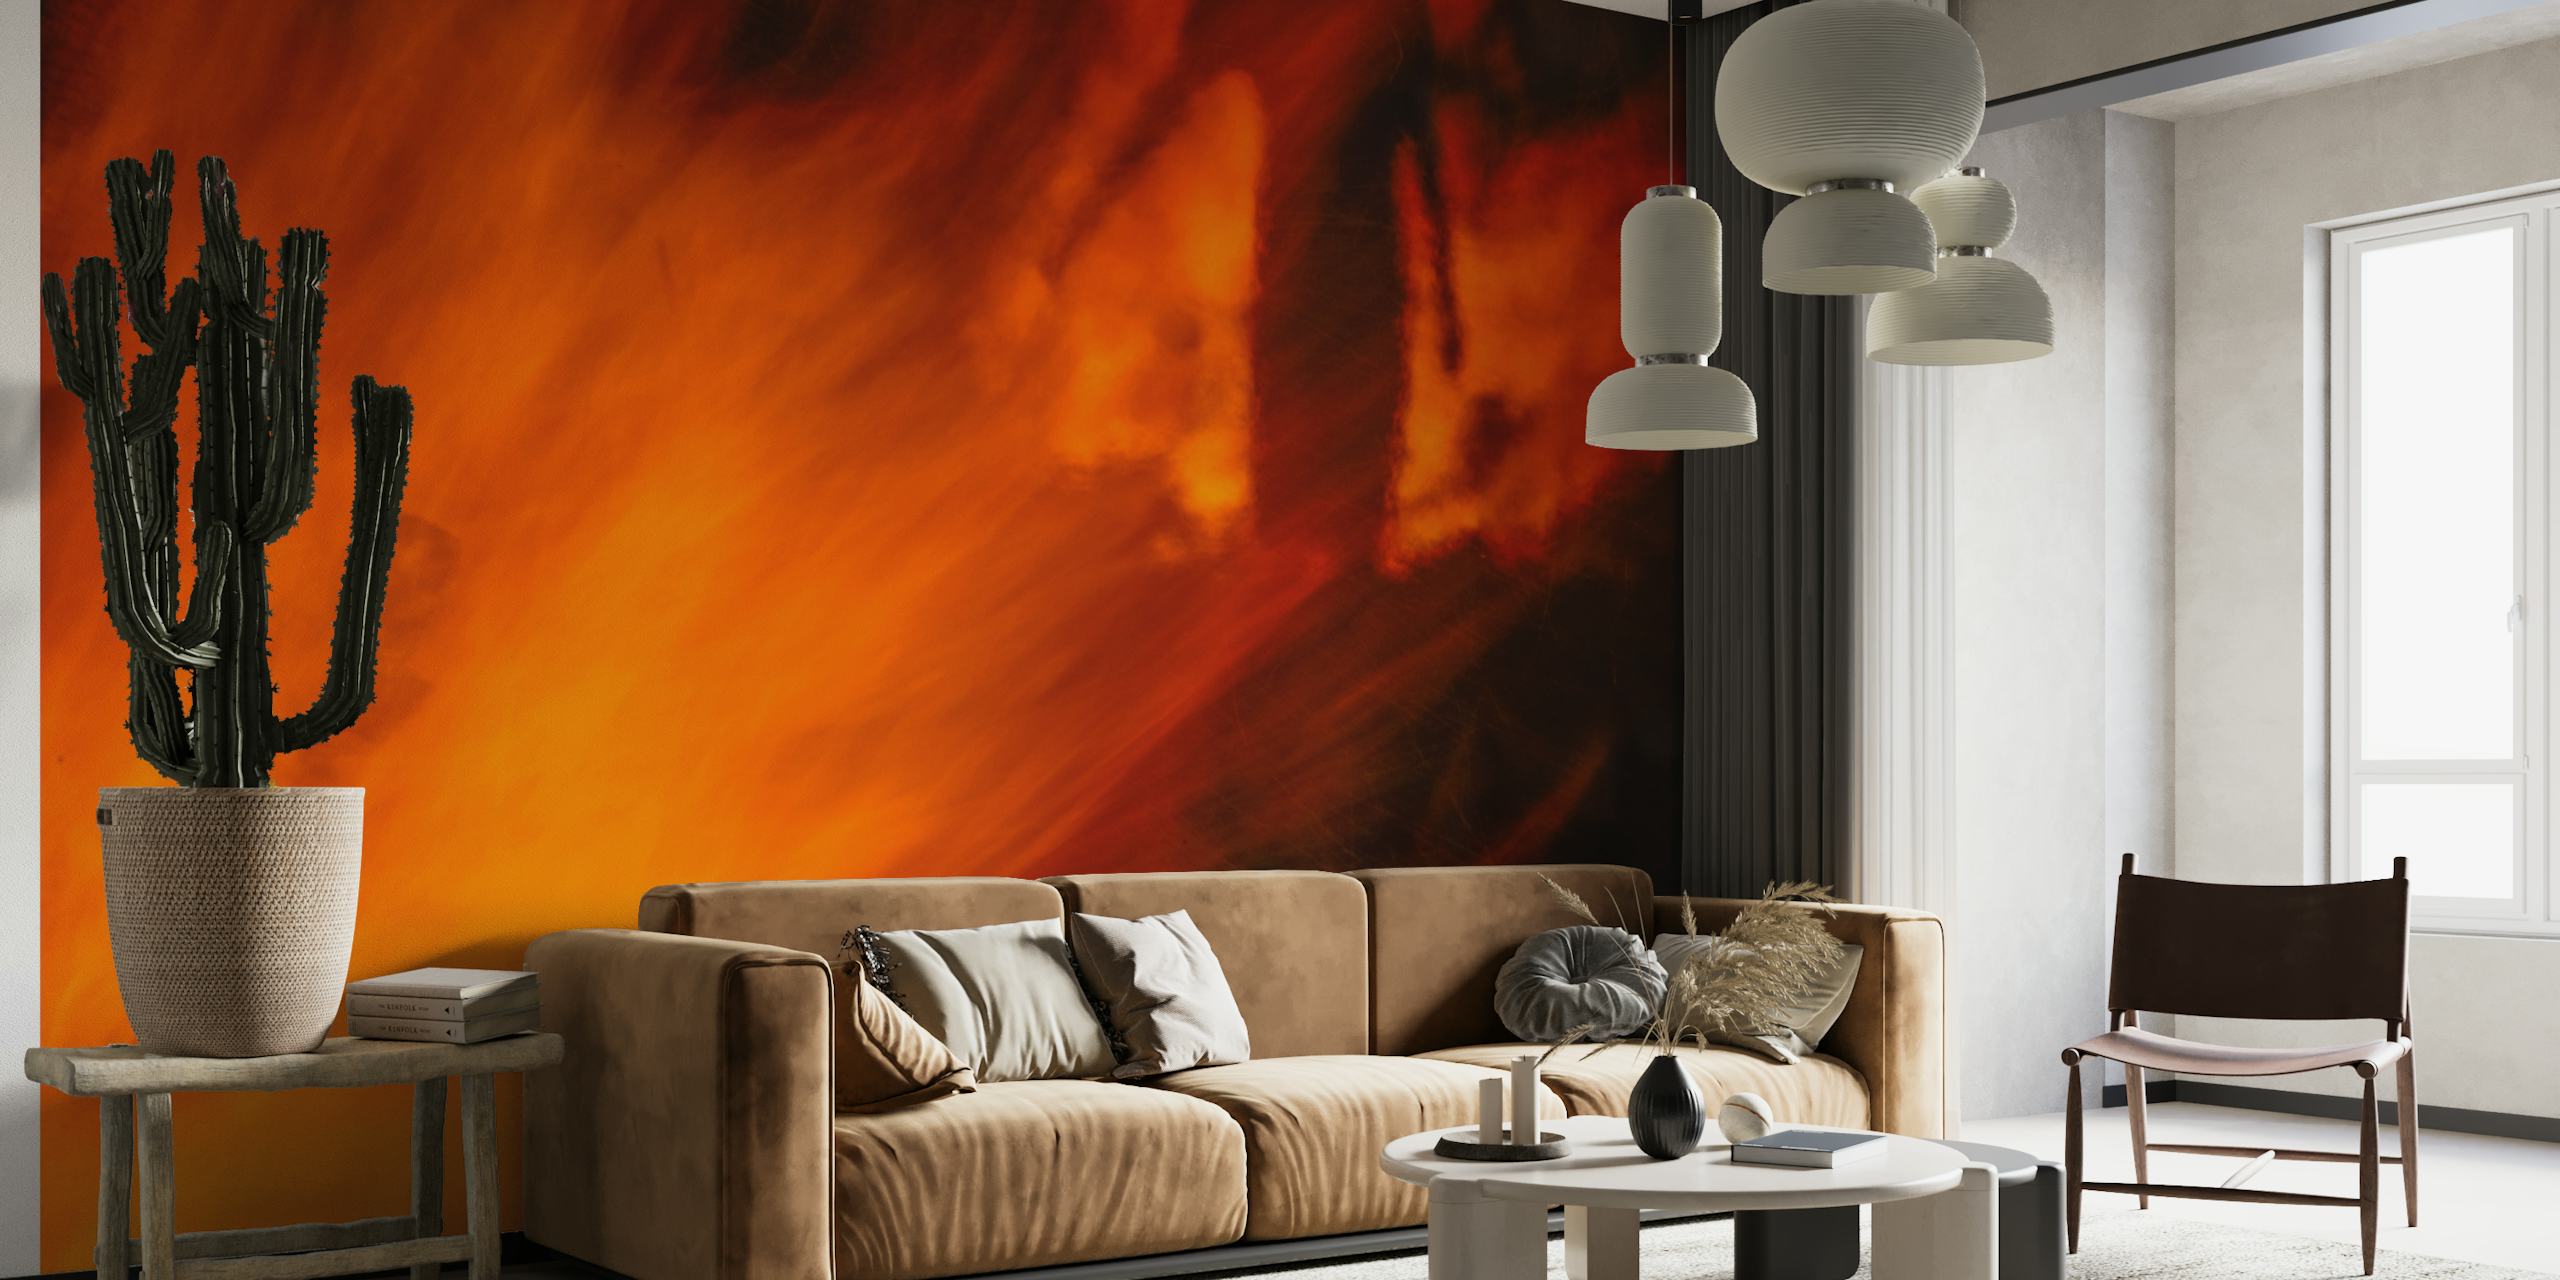 A wall mural with vibrant red and orange flames resembling the festive fires of Lag BaOmer